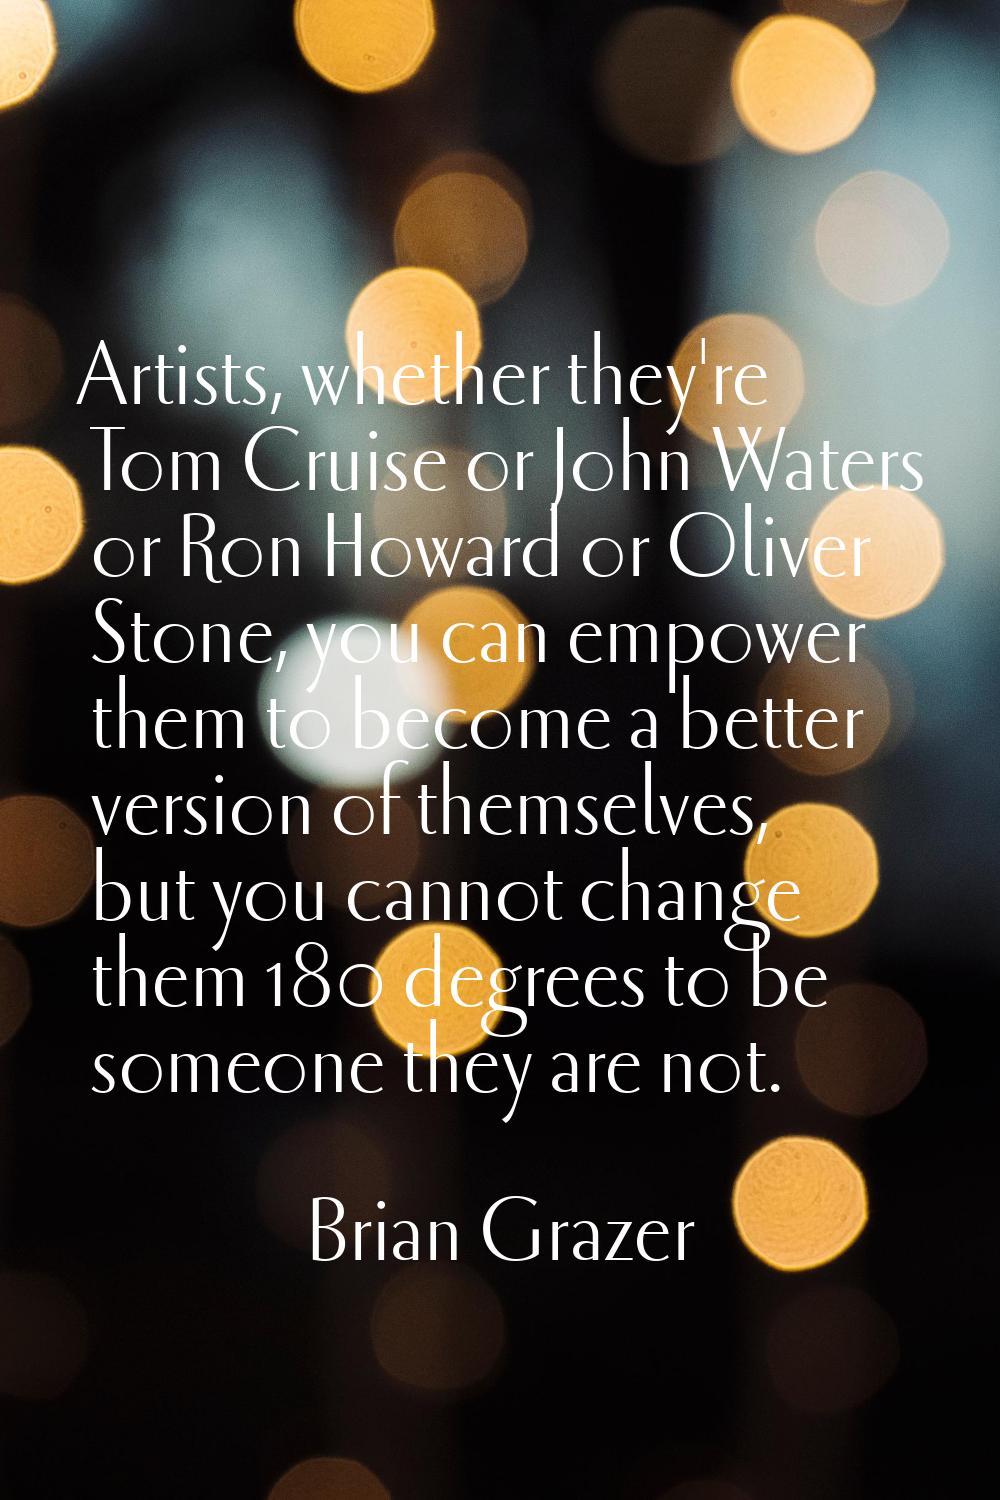 Artists, whether they're Tom Cruise or John Waters or Ron Howard or Oliver Stone, you can empower t